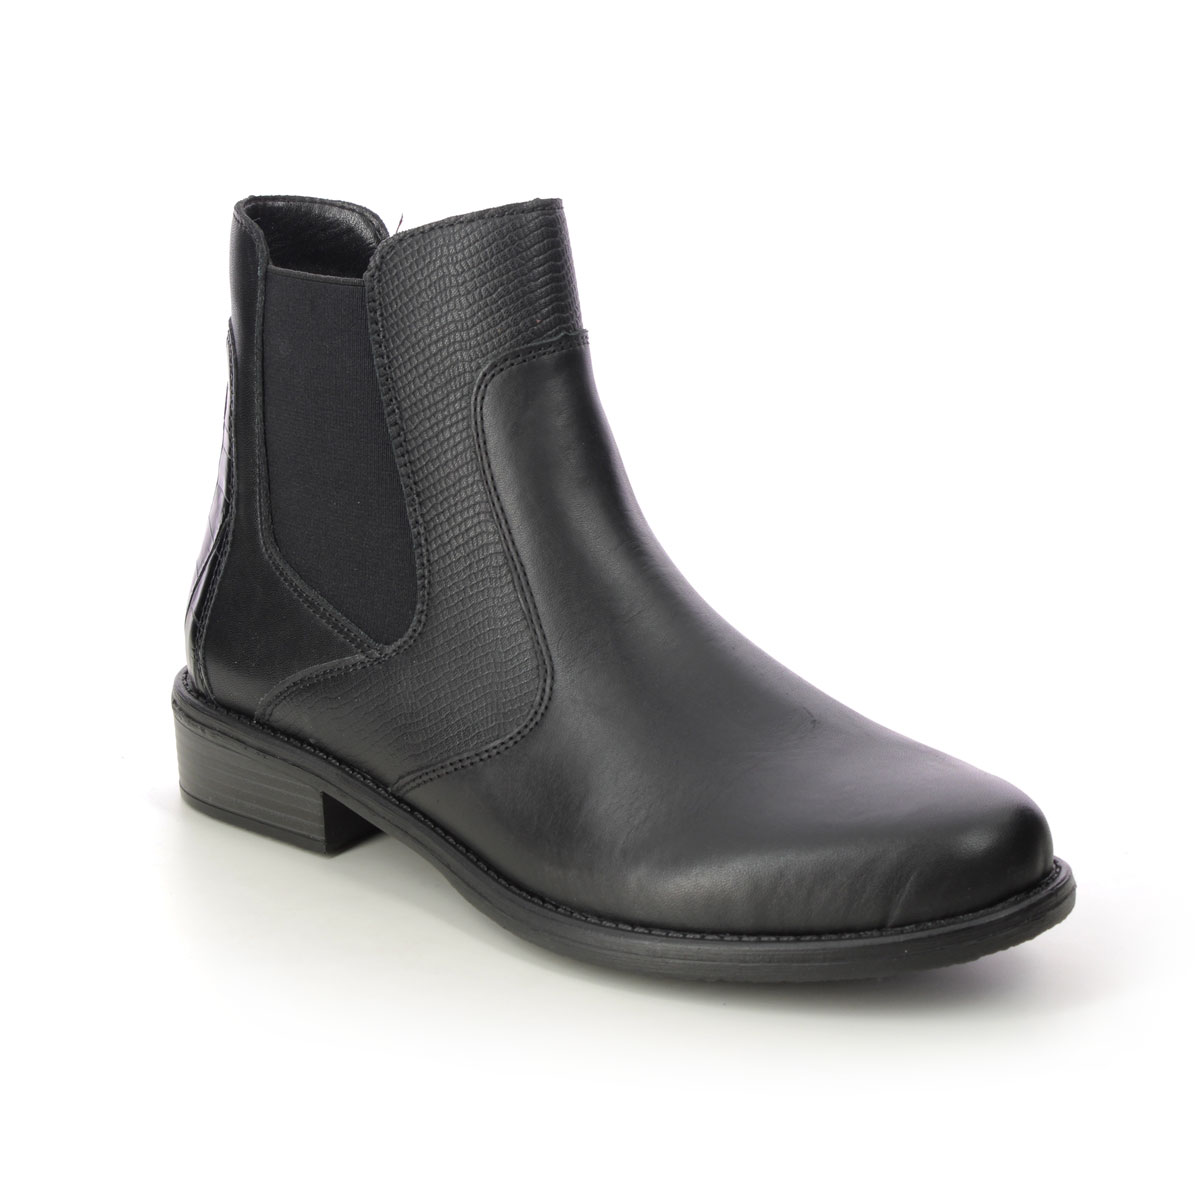 Remonte Peechlap Black Leather Womens Chelsea Boots D0F70-01 In Size 40 In Plain Black Leather